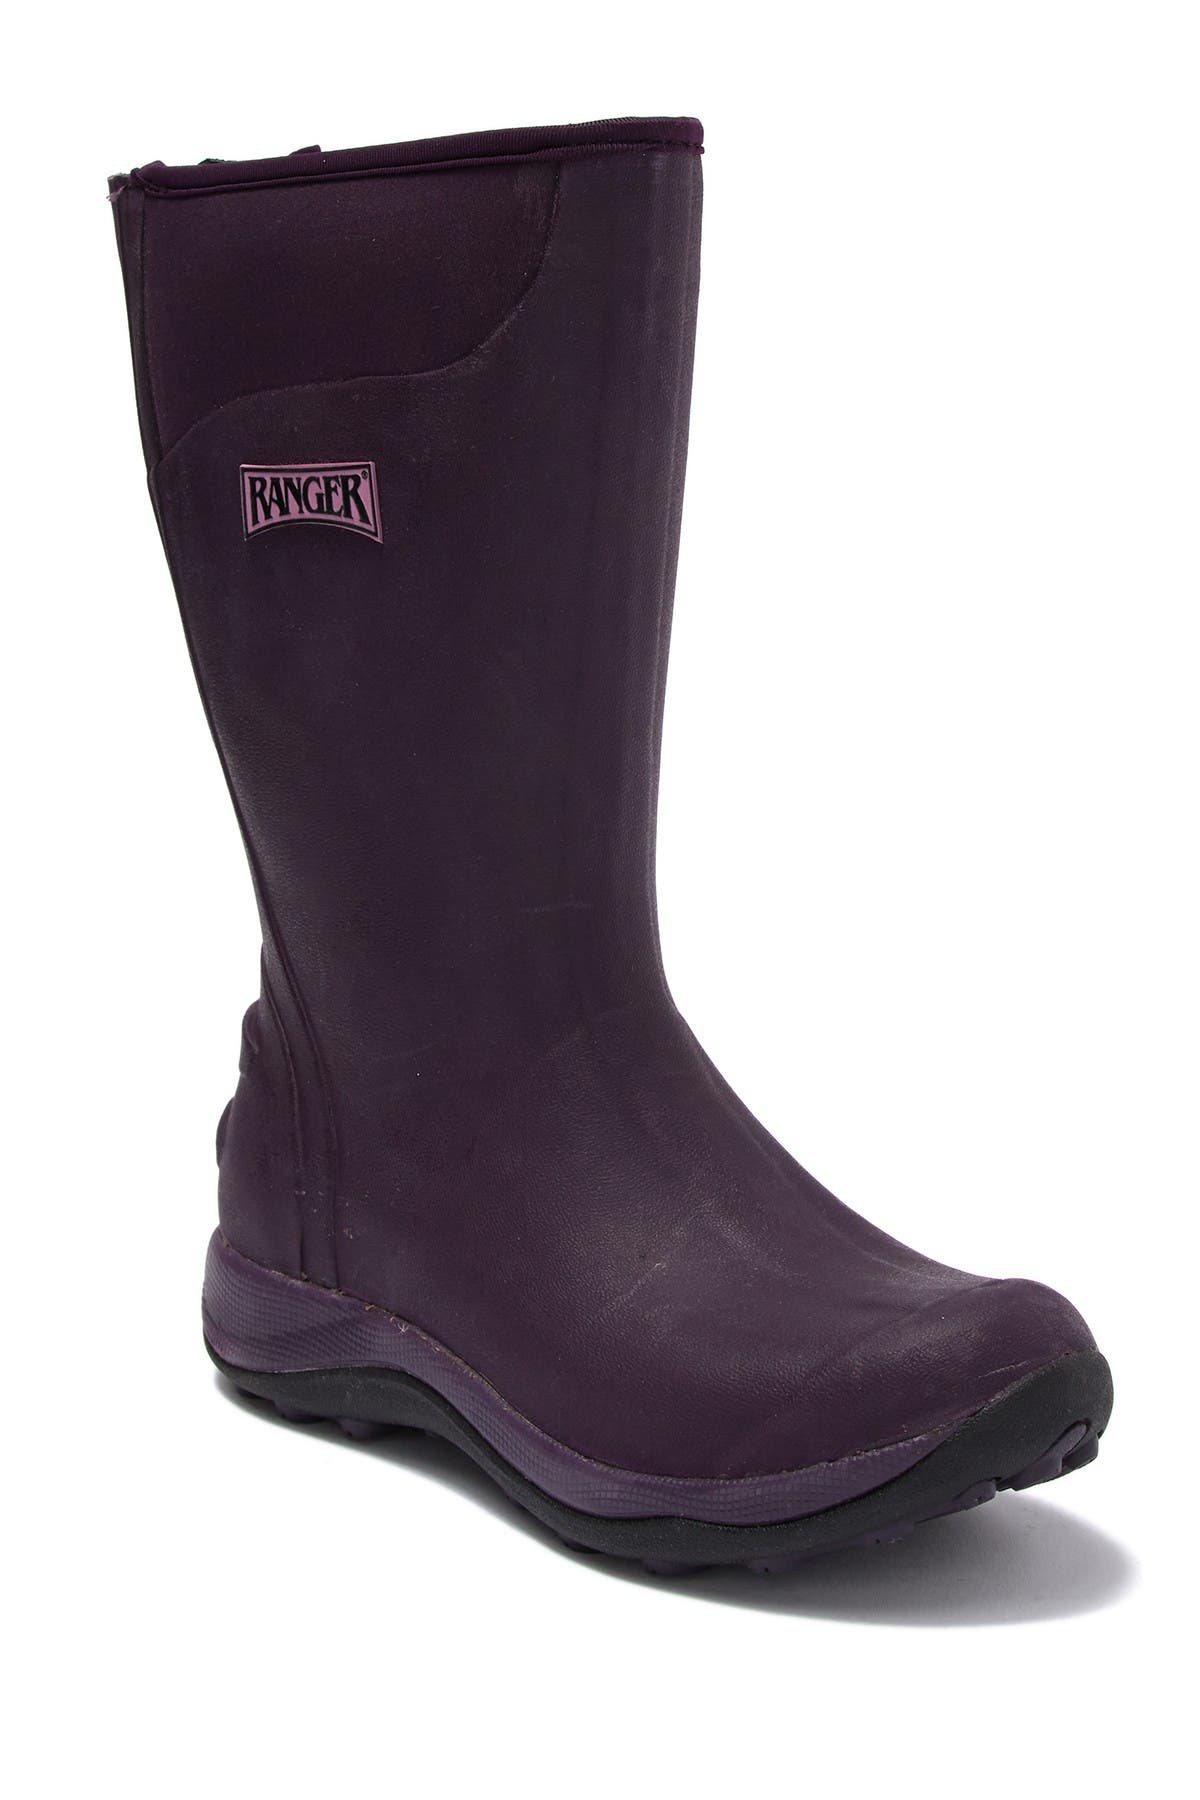 ranger pike collection rubber boots